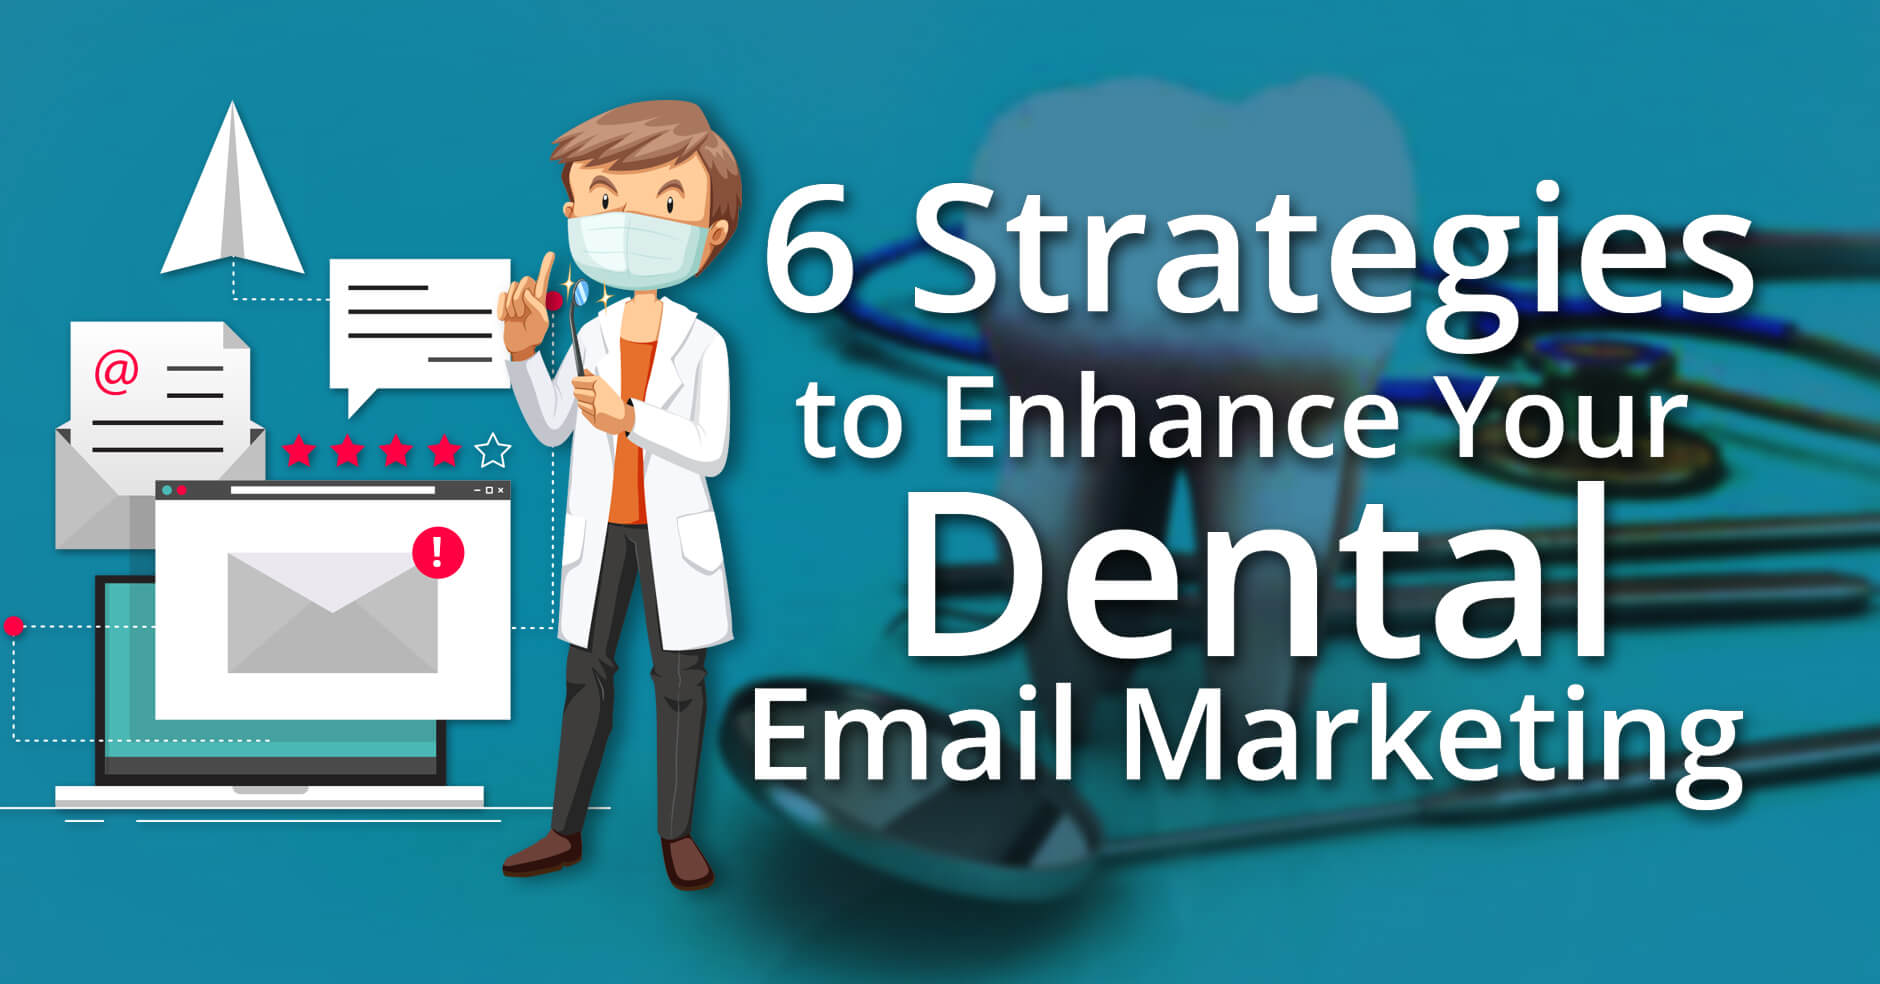 6 Strategies to Enhance Your Dental Email Marketing